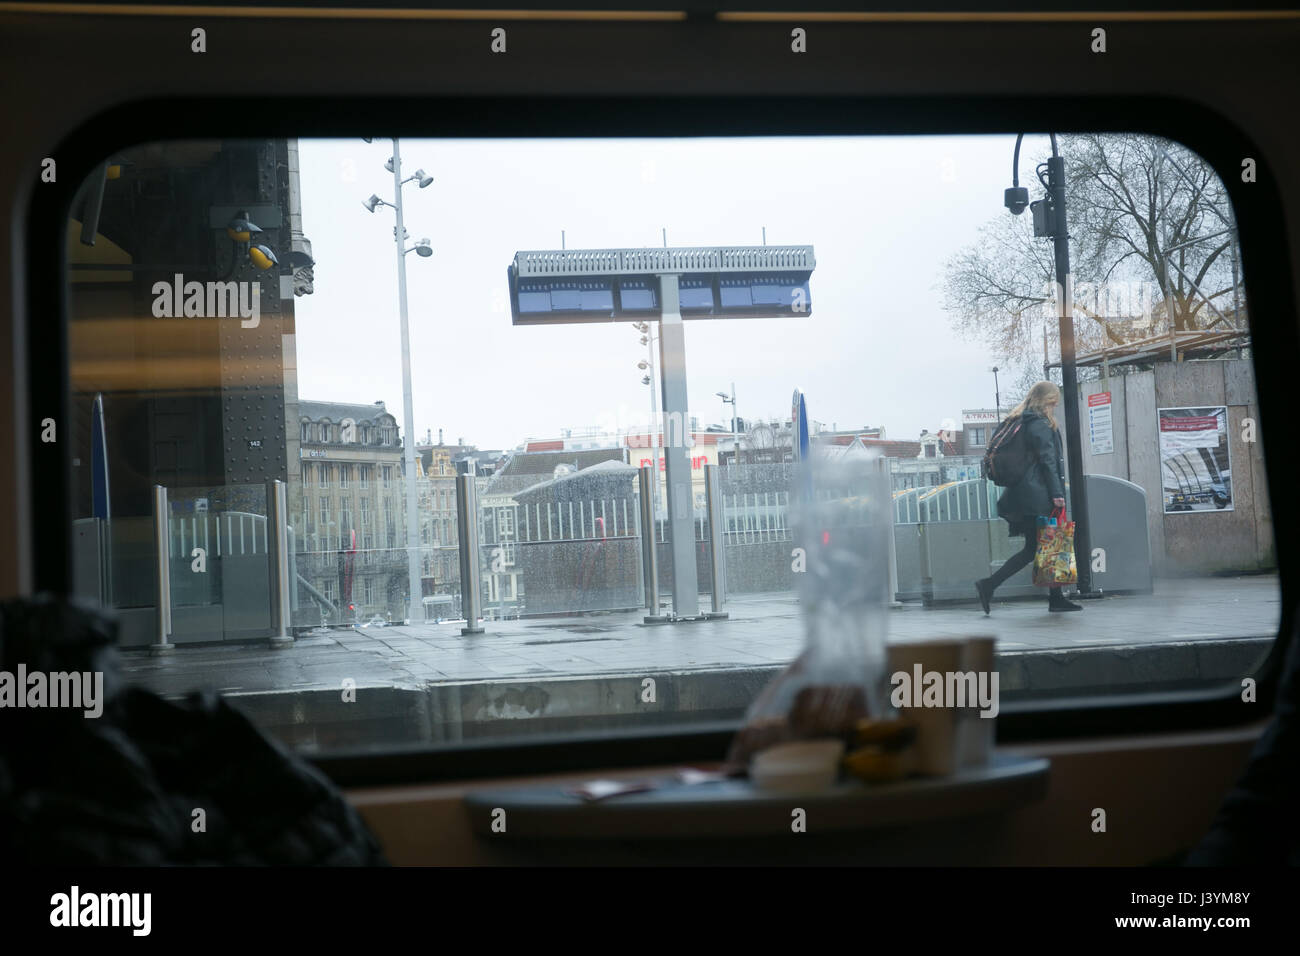 capture inside a wagon at train station in the netherlands Stock Photo